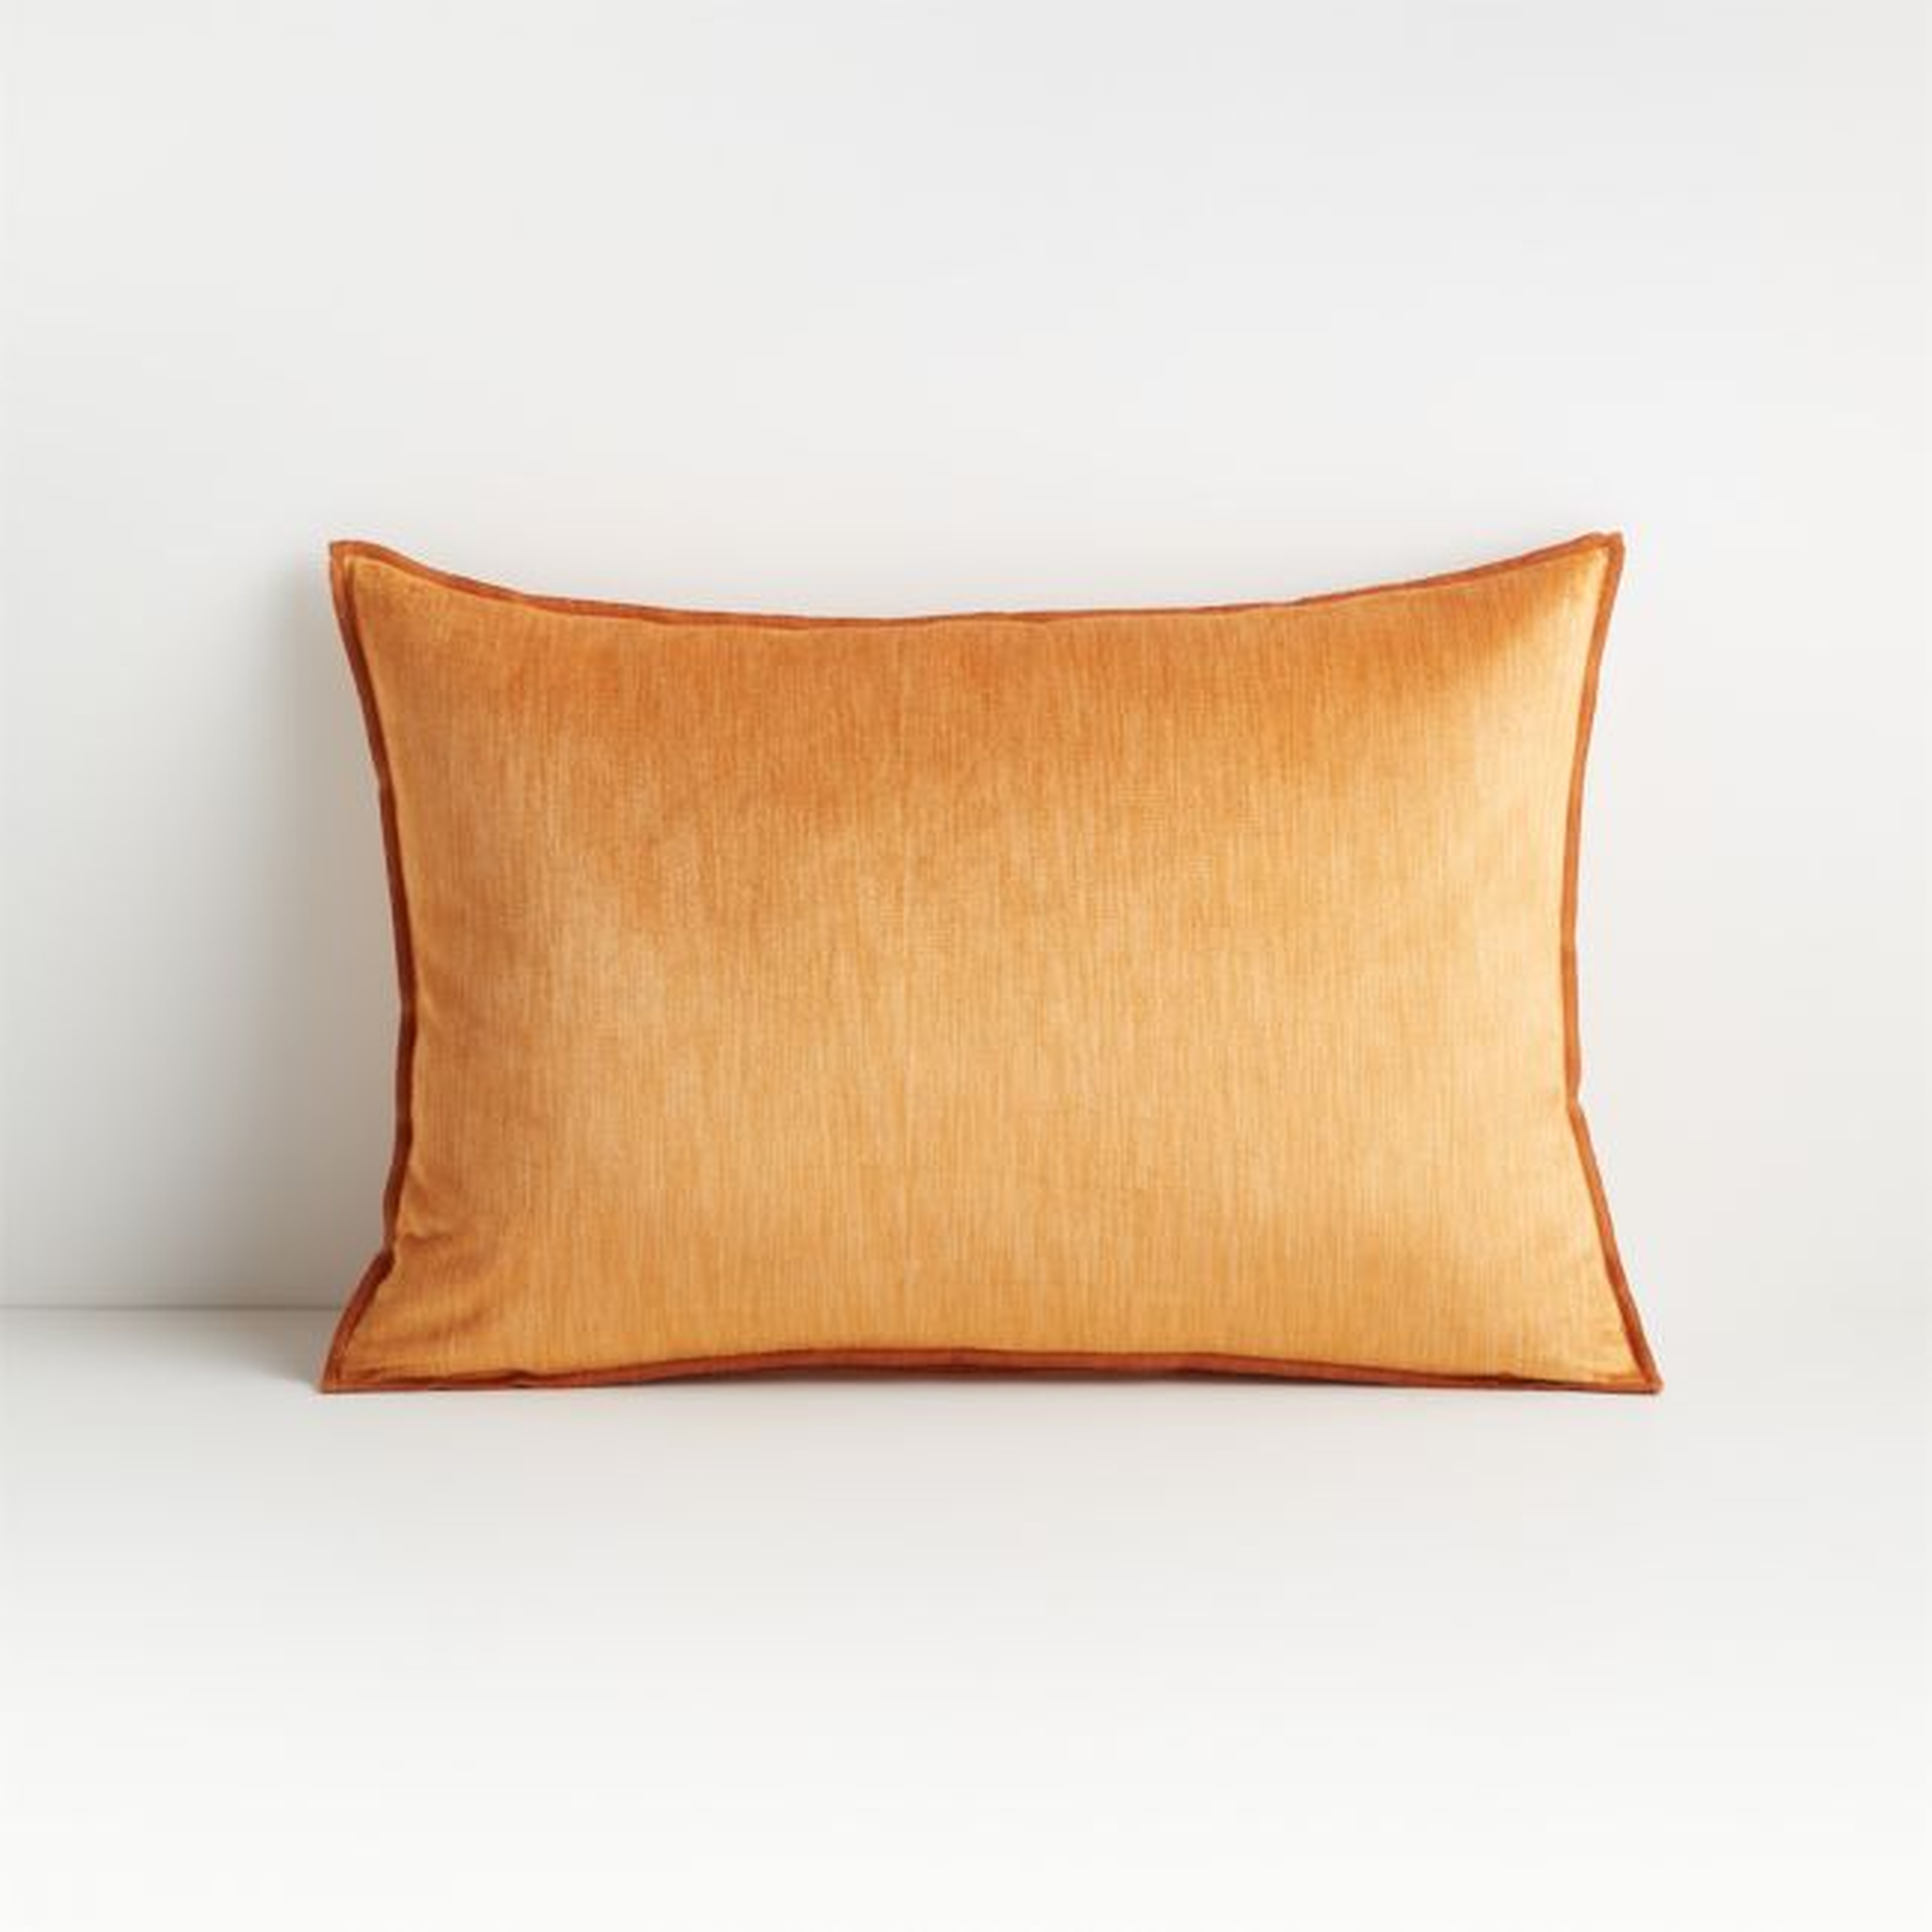 Styria Amber 22"x15" Pillow with Feather-Down Insert - Crate and Barrel